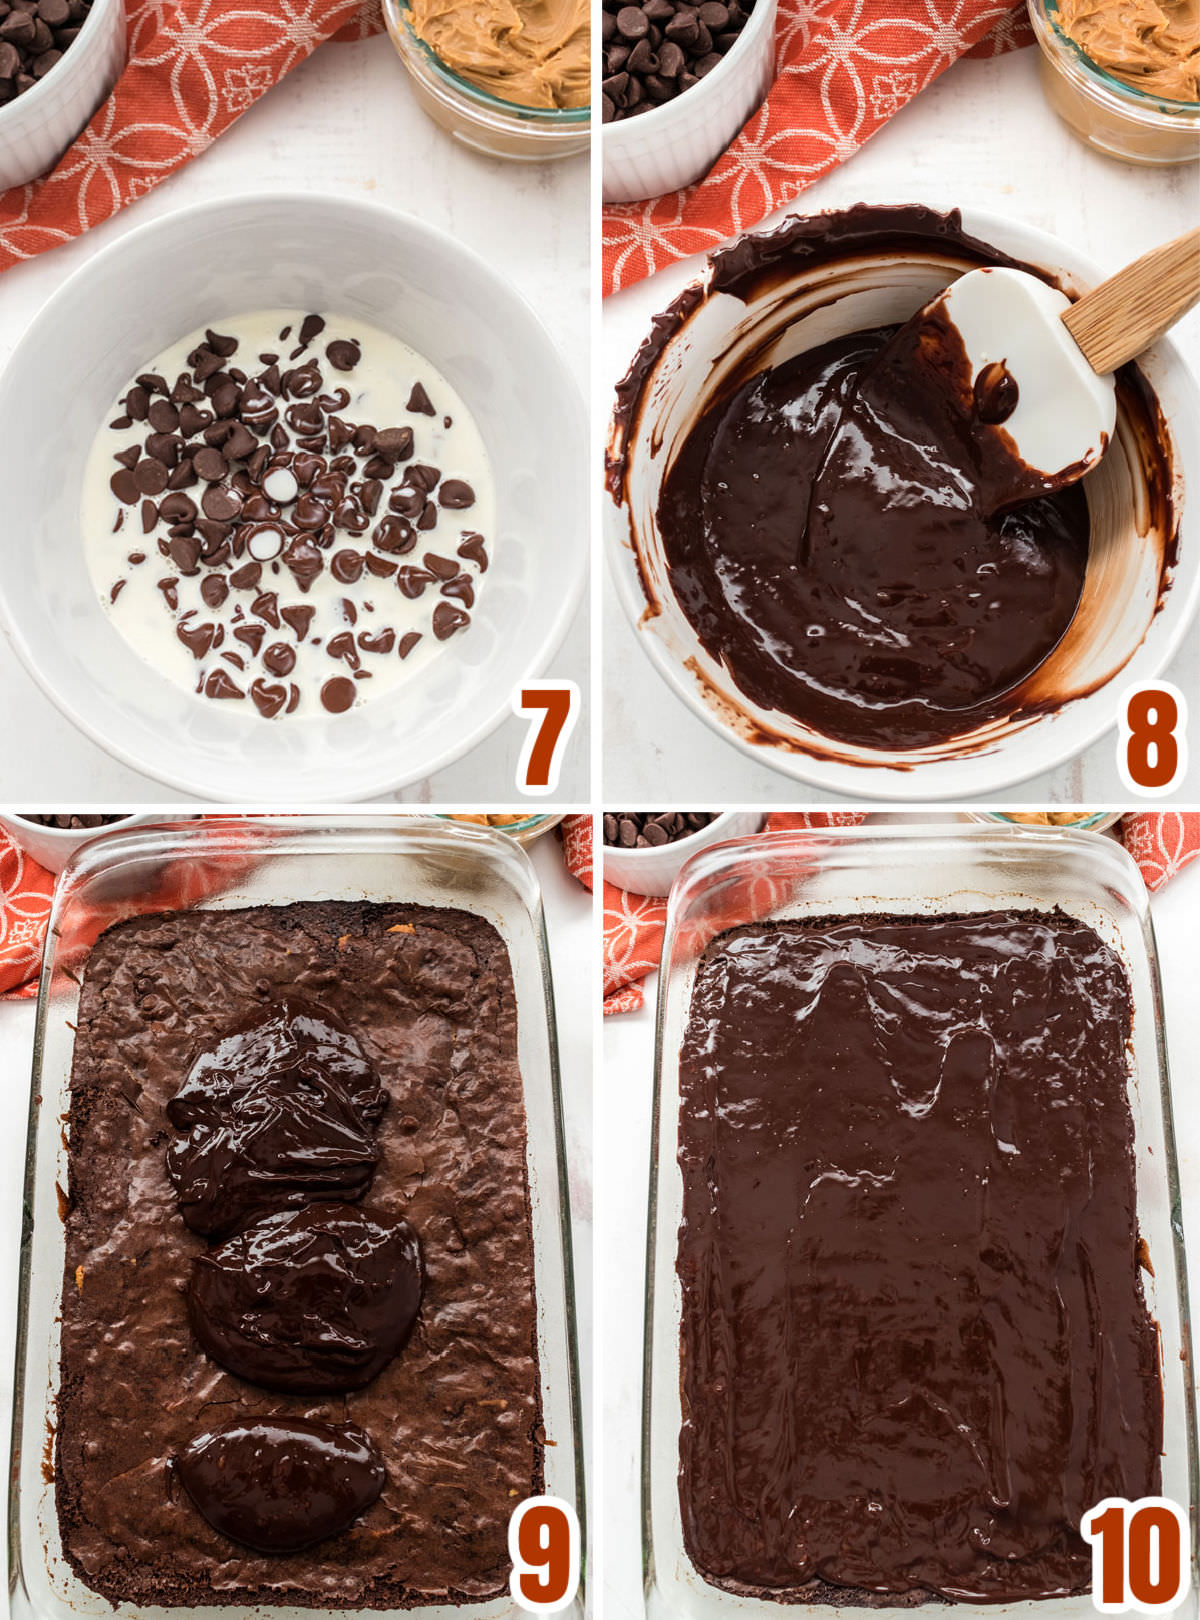 Collage image showing how to make Chocolate Ganache Frosting for the brownies.